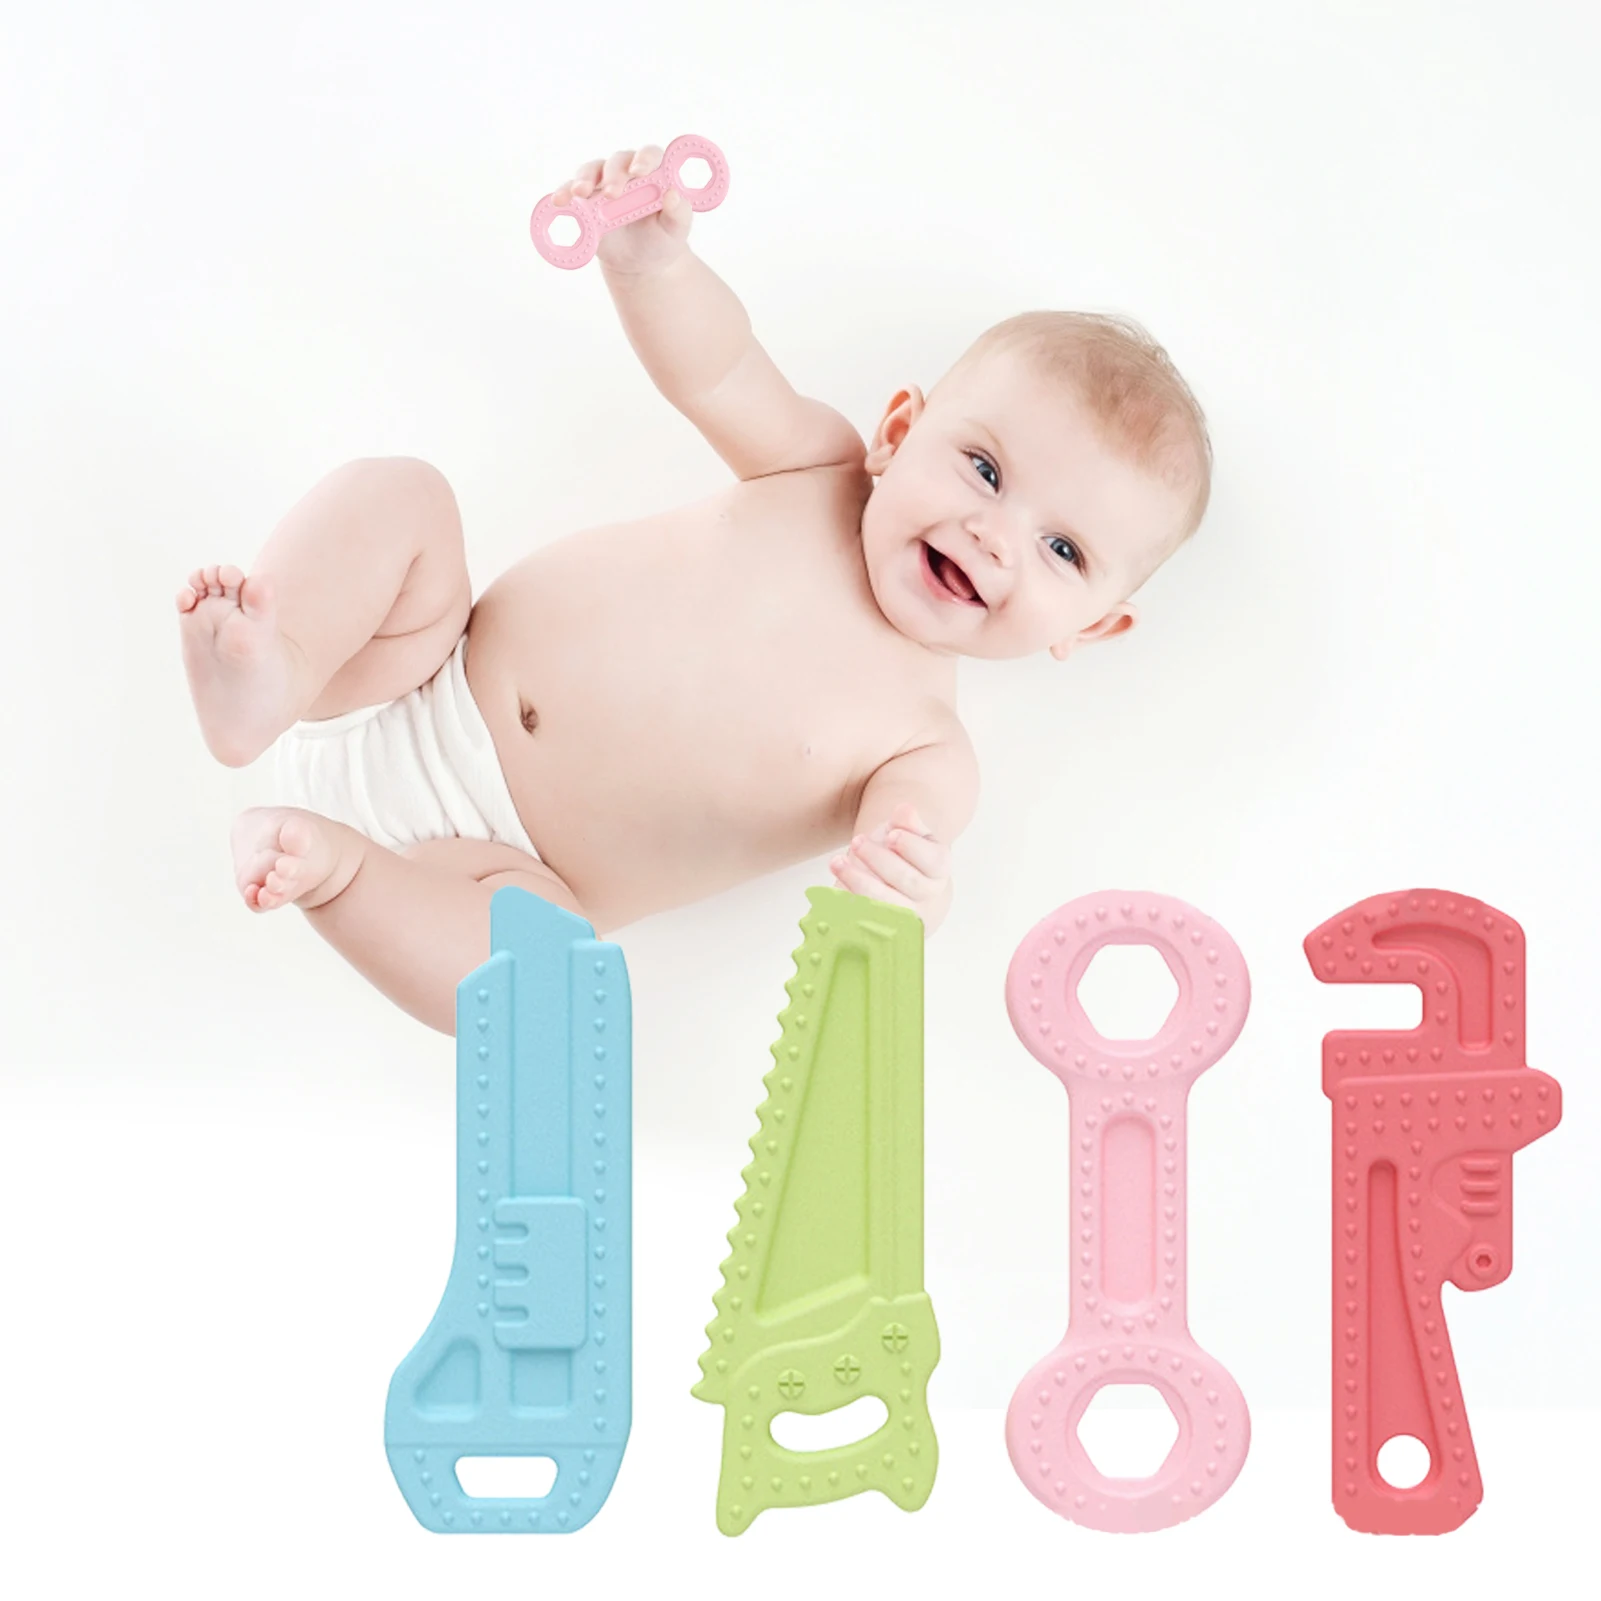 

Baby Teethers 0-6 Months 4 Pcs Baby Teether Toys Set Baby Chew Toys Soothe Babies Sore Gums And Improve Chewing Ability Infant